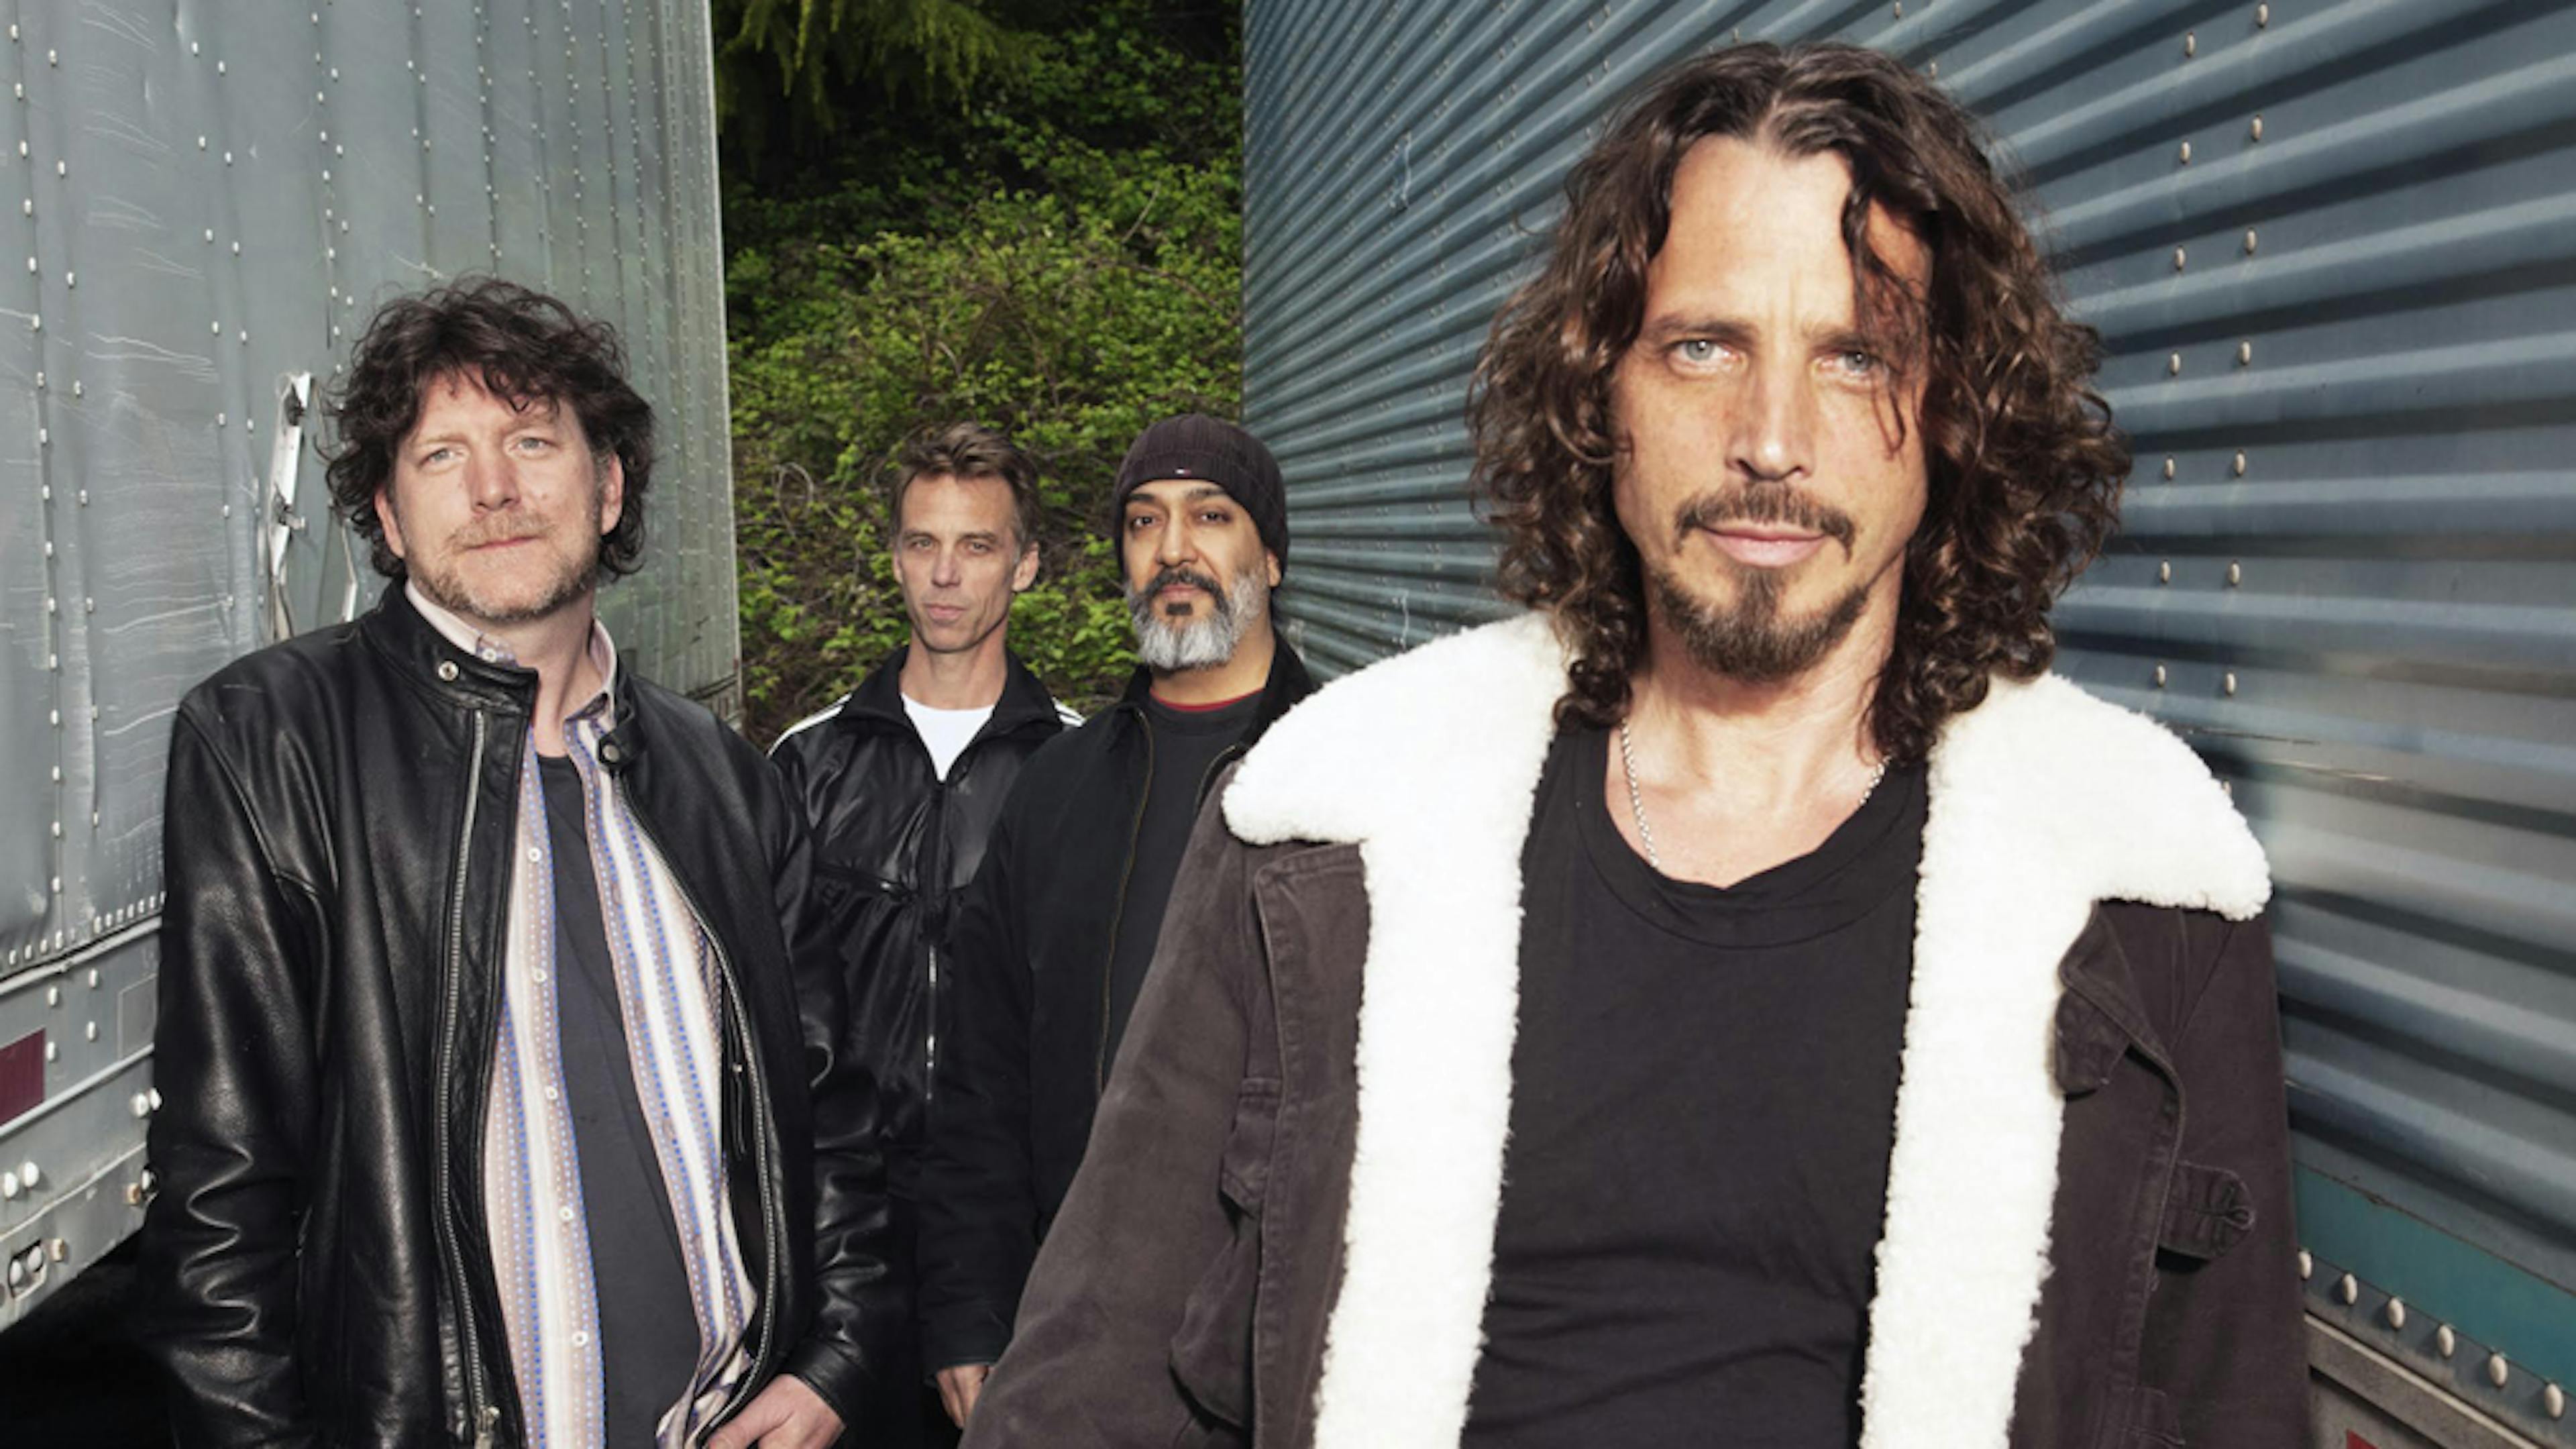 15 classic songs you probably didn’t know that Soundgarden covered